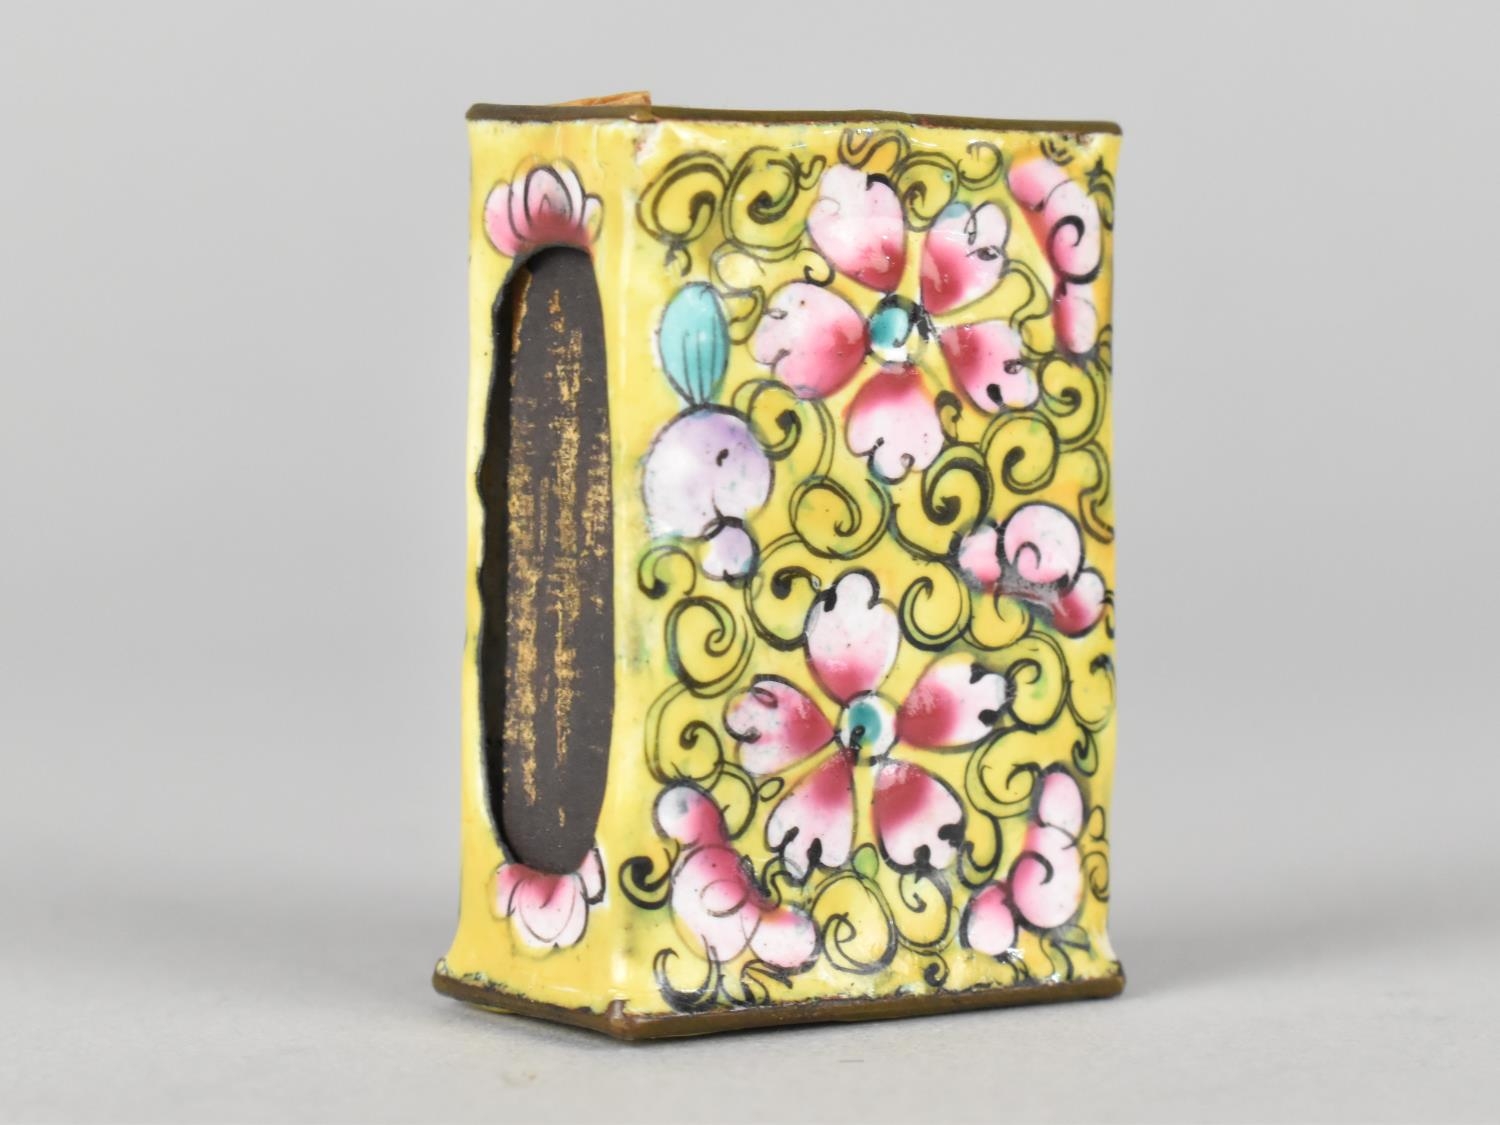 A Small Late 19th/Early 20th Century Chinese Enamelled Matchbox Holder with Floral Decoration, 4.